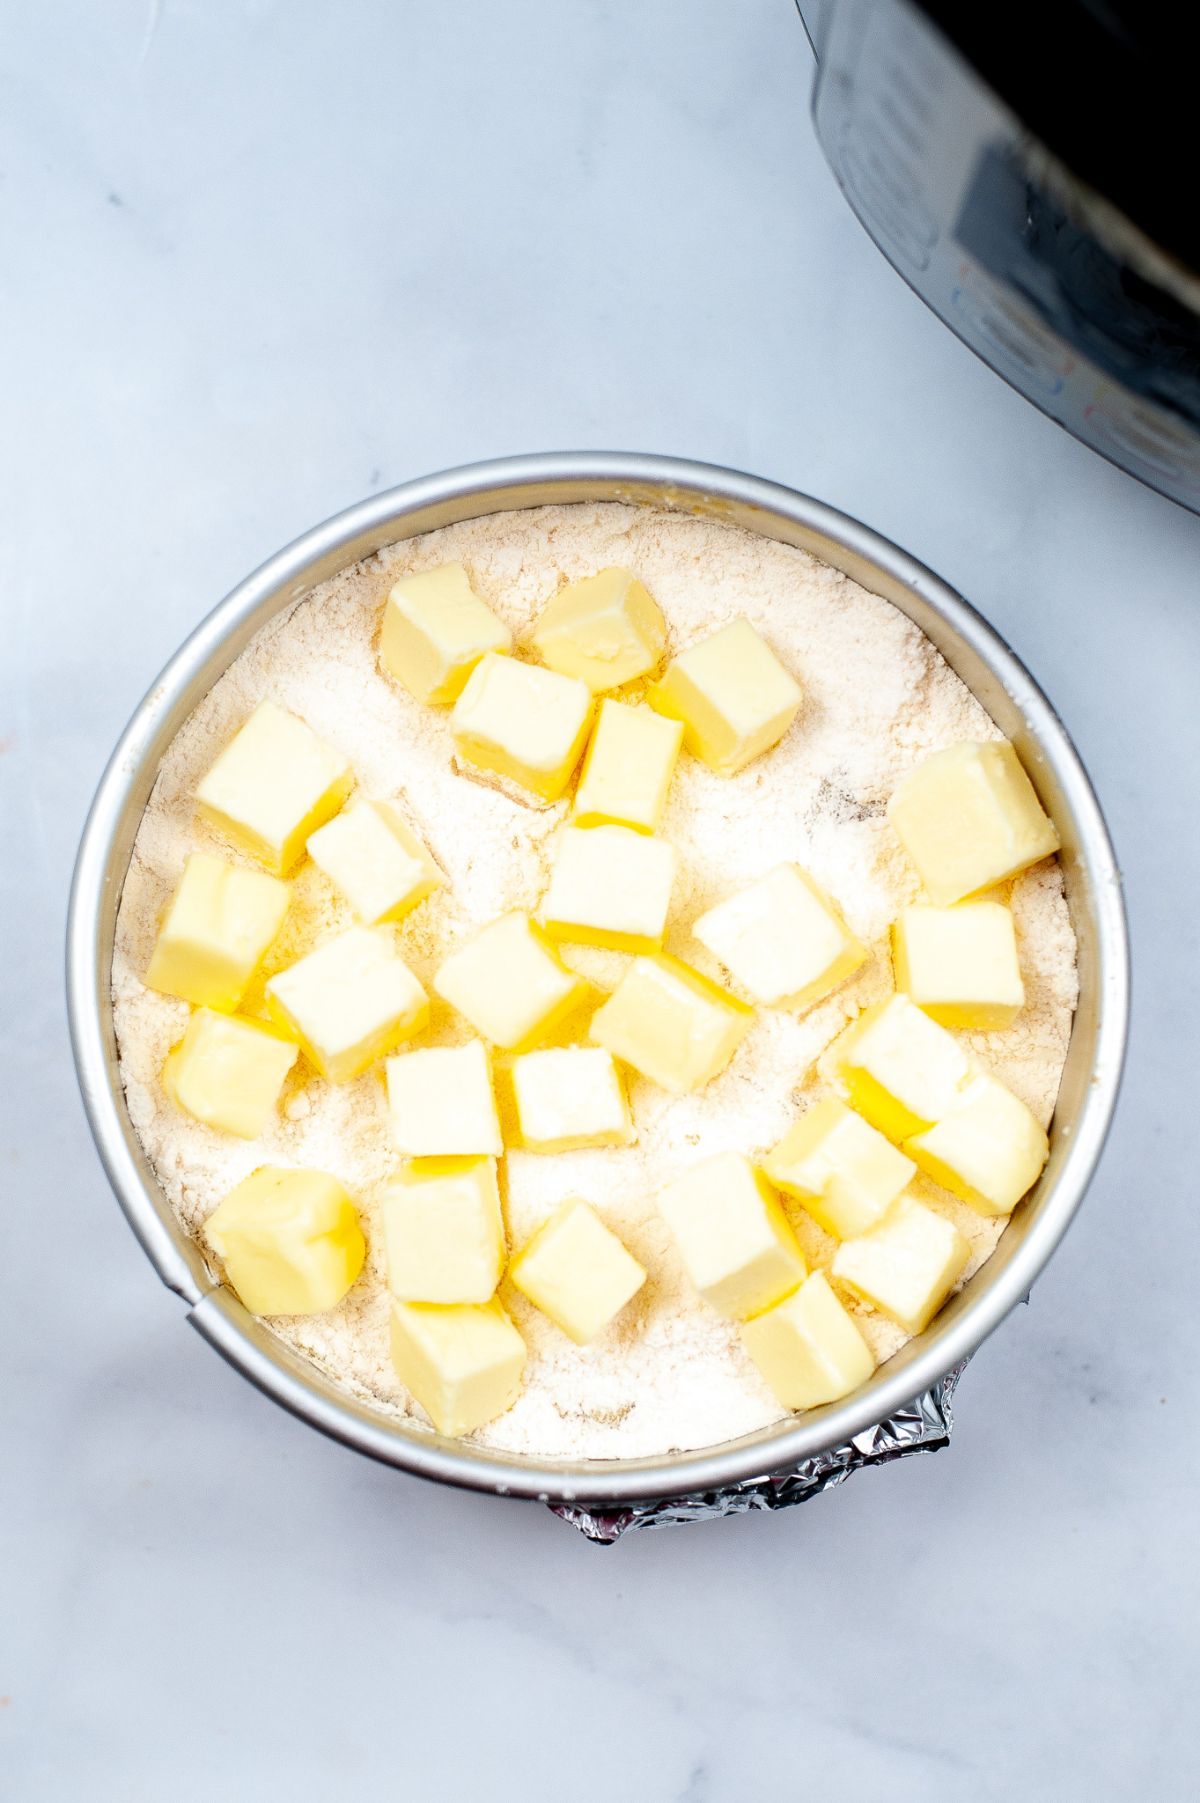 A circular baking pan with the peach and cake mixture topped with cornstarch and cubed butter.